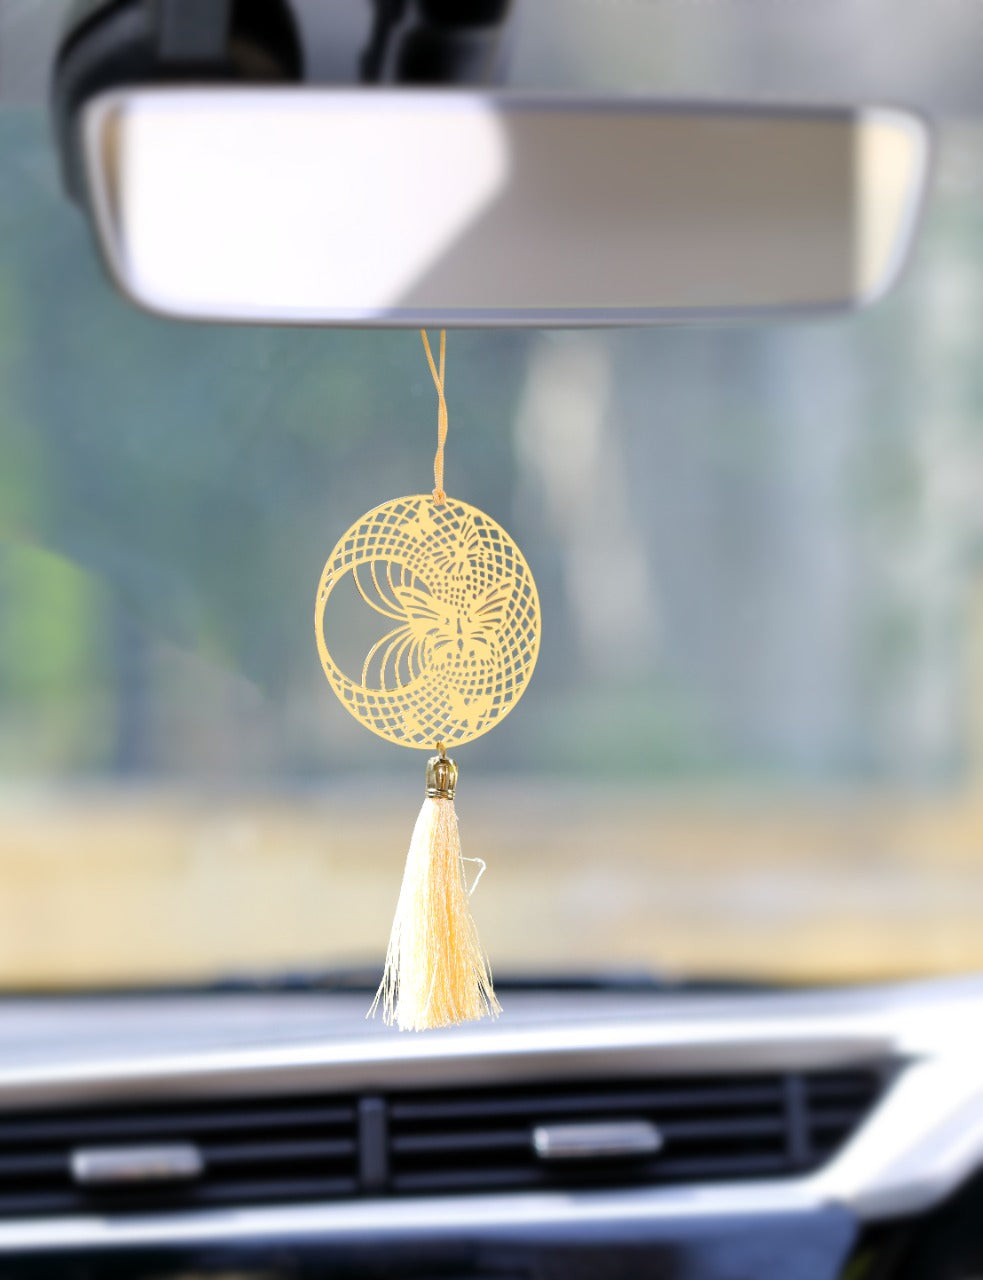 Good vibes only car rear view mirror hanging décor in brass metal